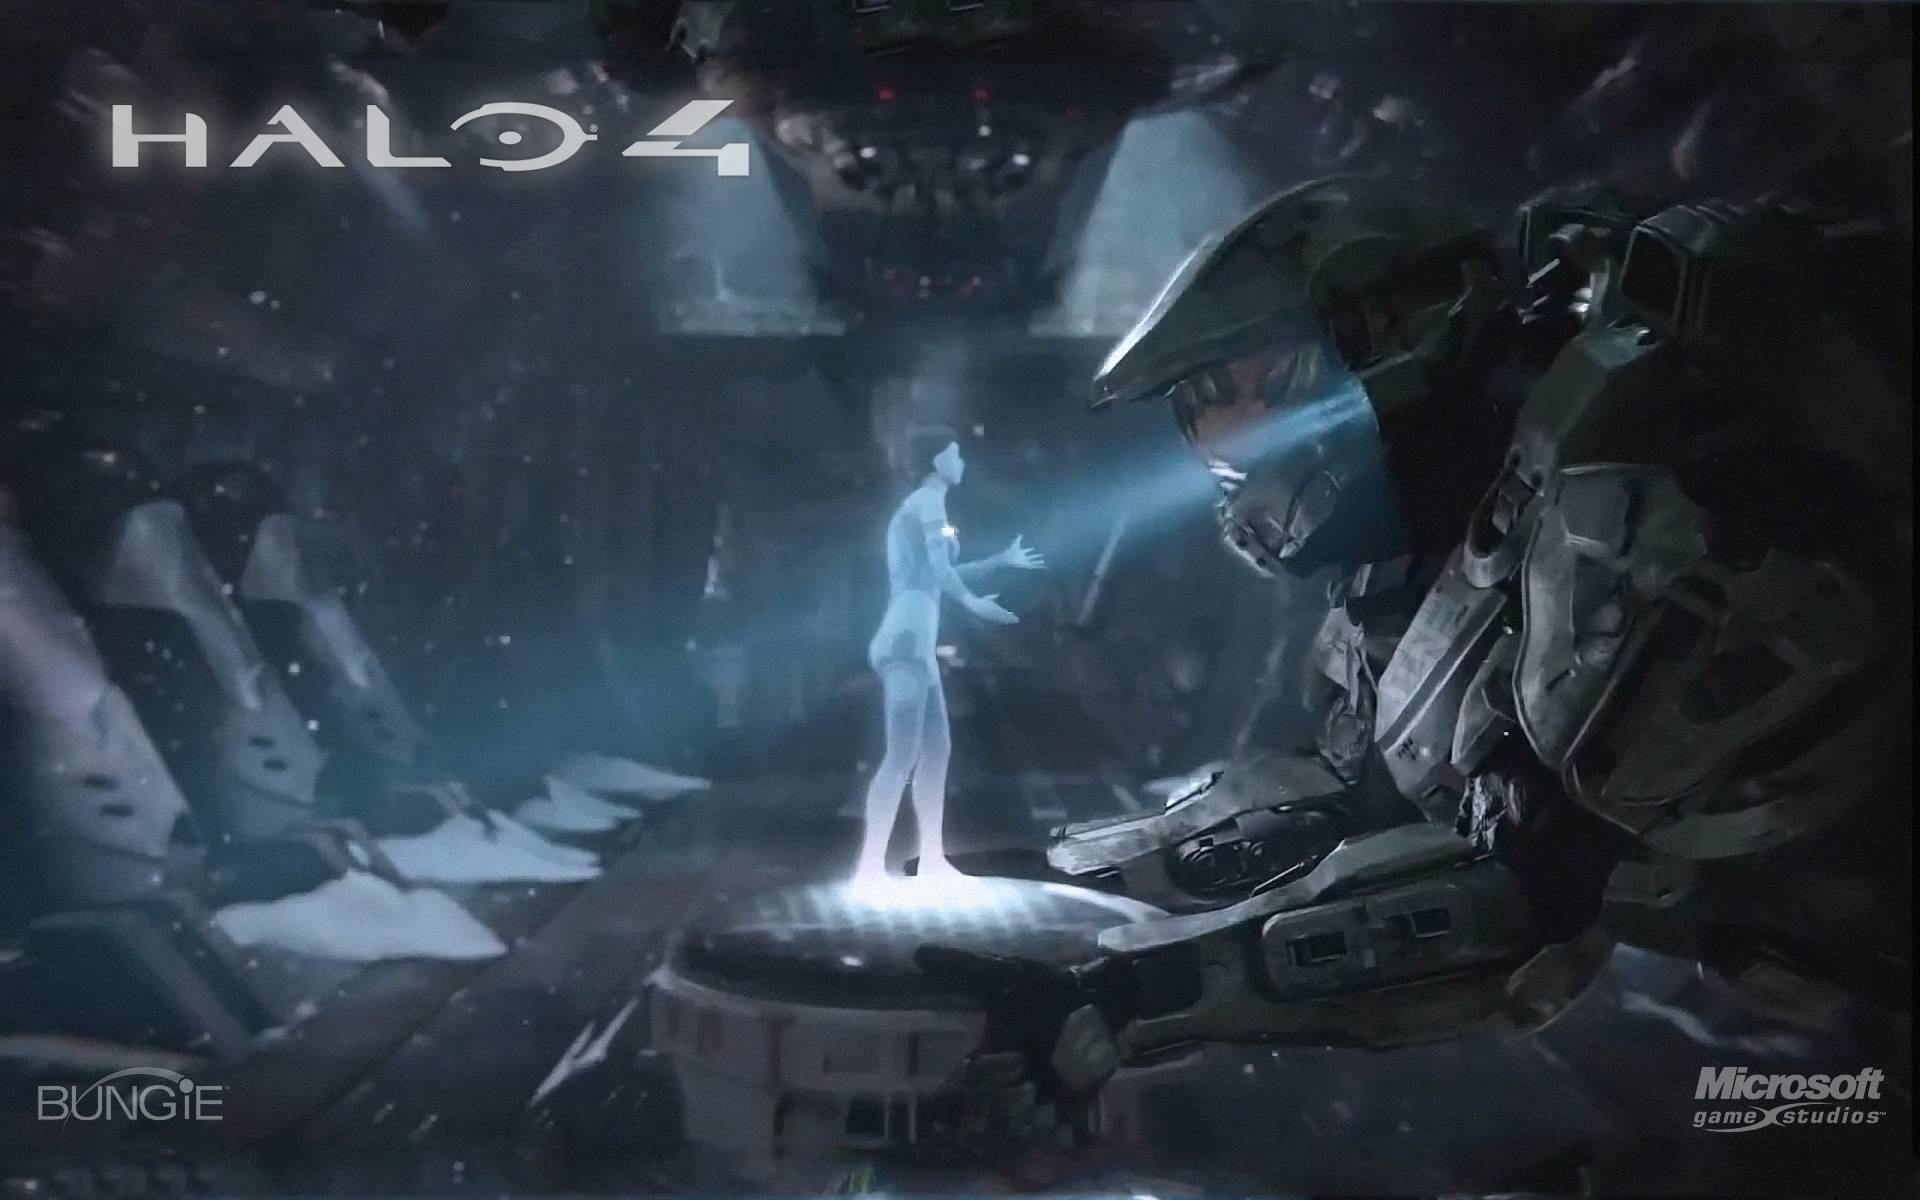 1920x1200 Halo 4 Wallpaper HD Exclusive by Ockre